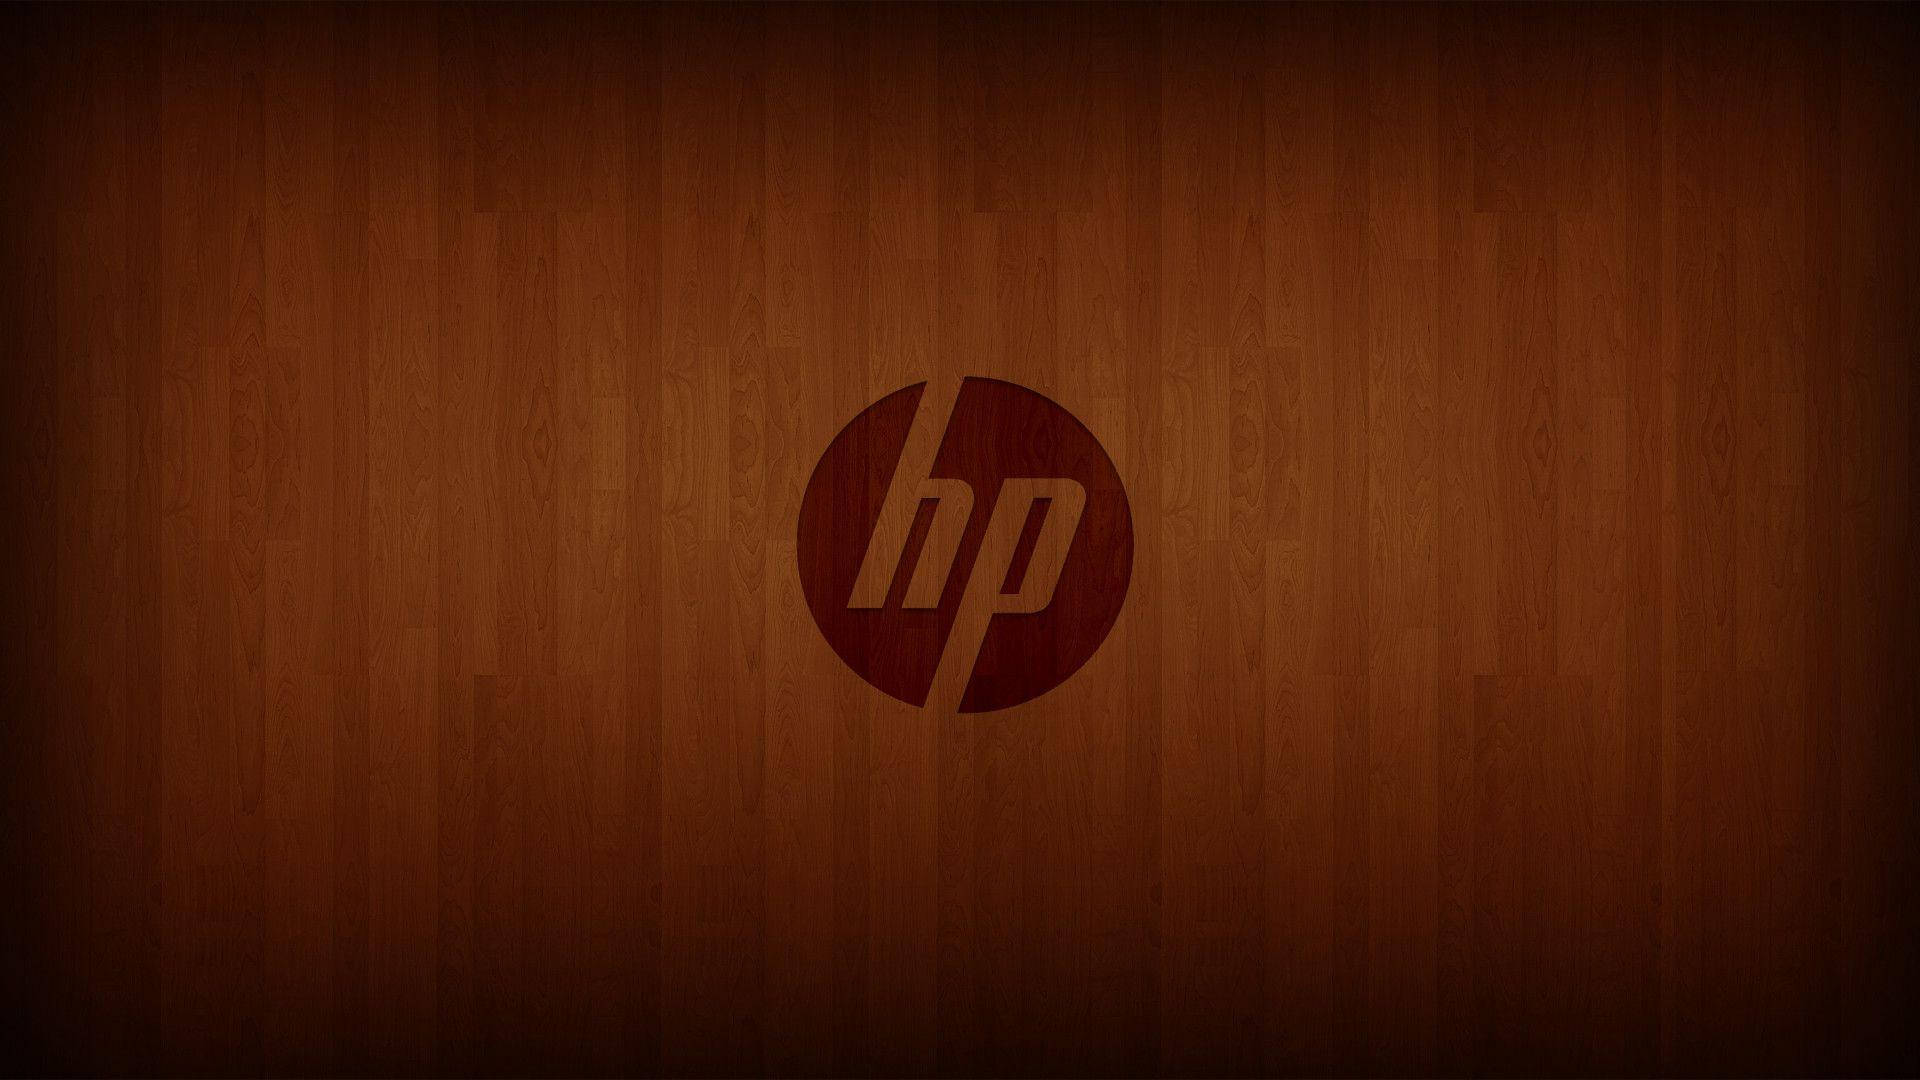 Free Hp Wallpaper Downloads, [100+] Hp Wallpapers for FREE 